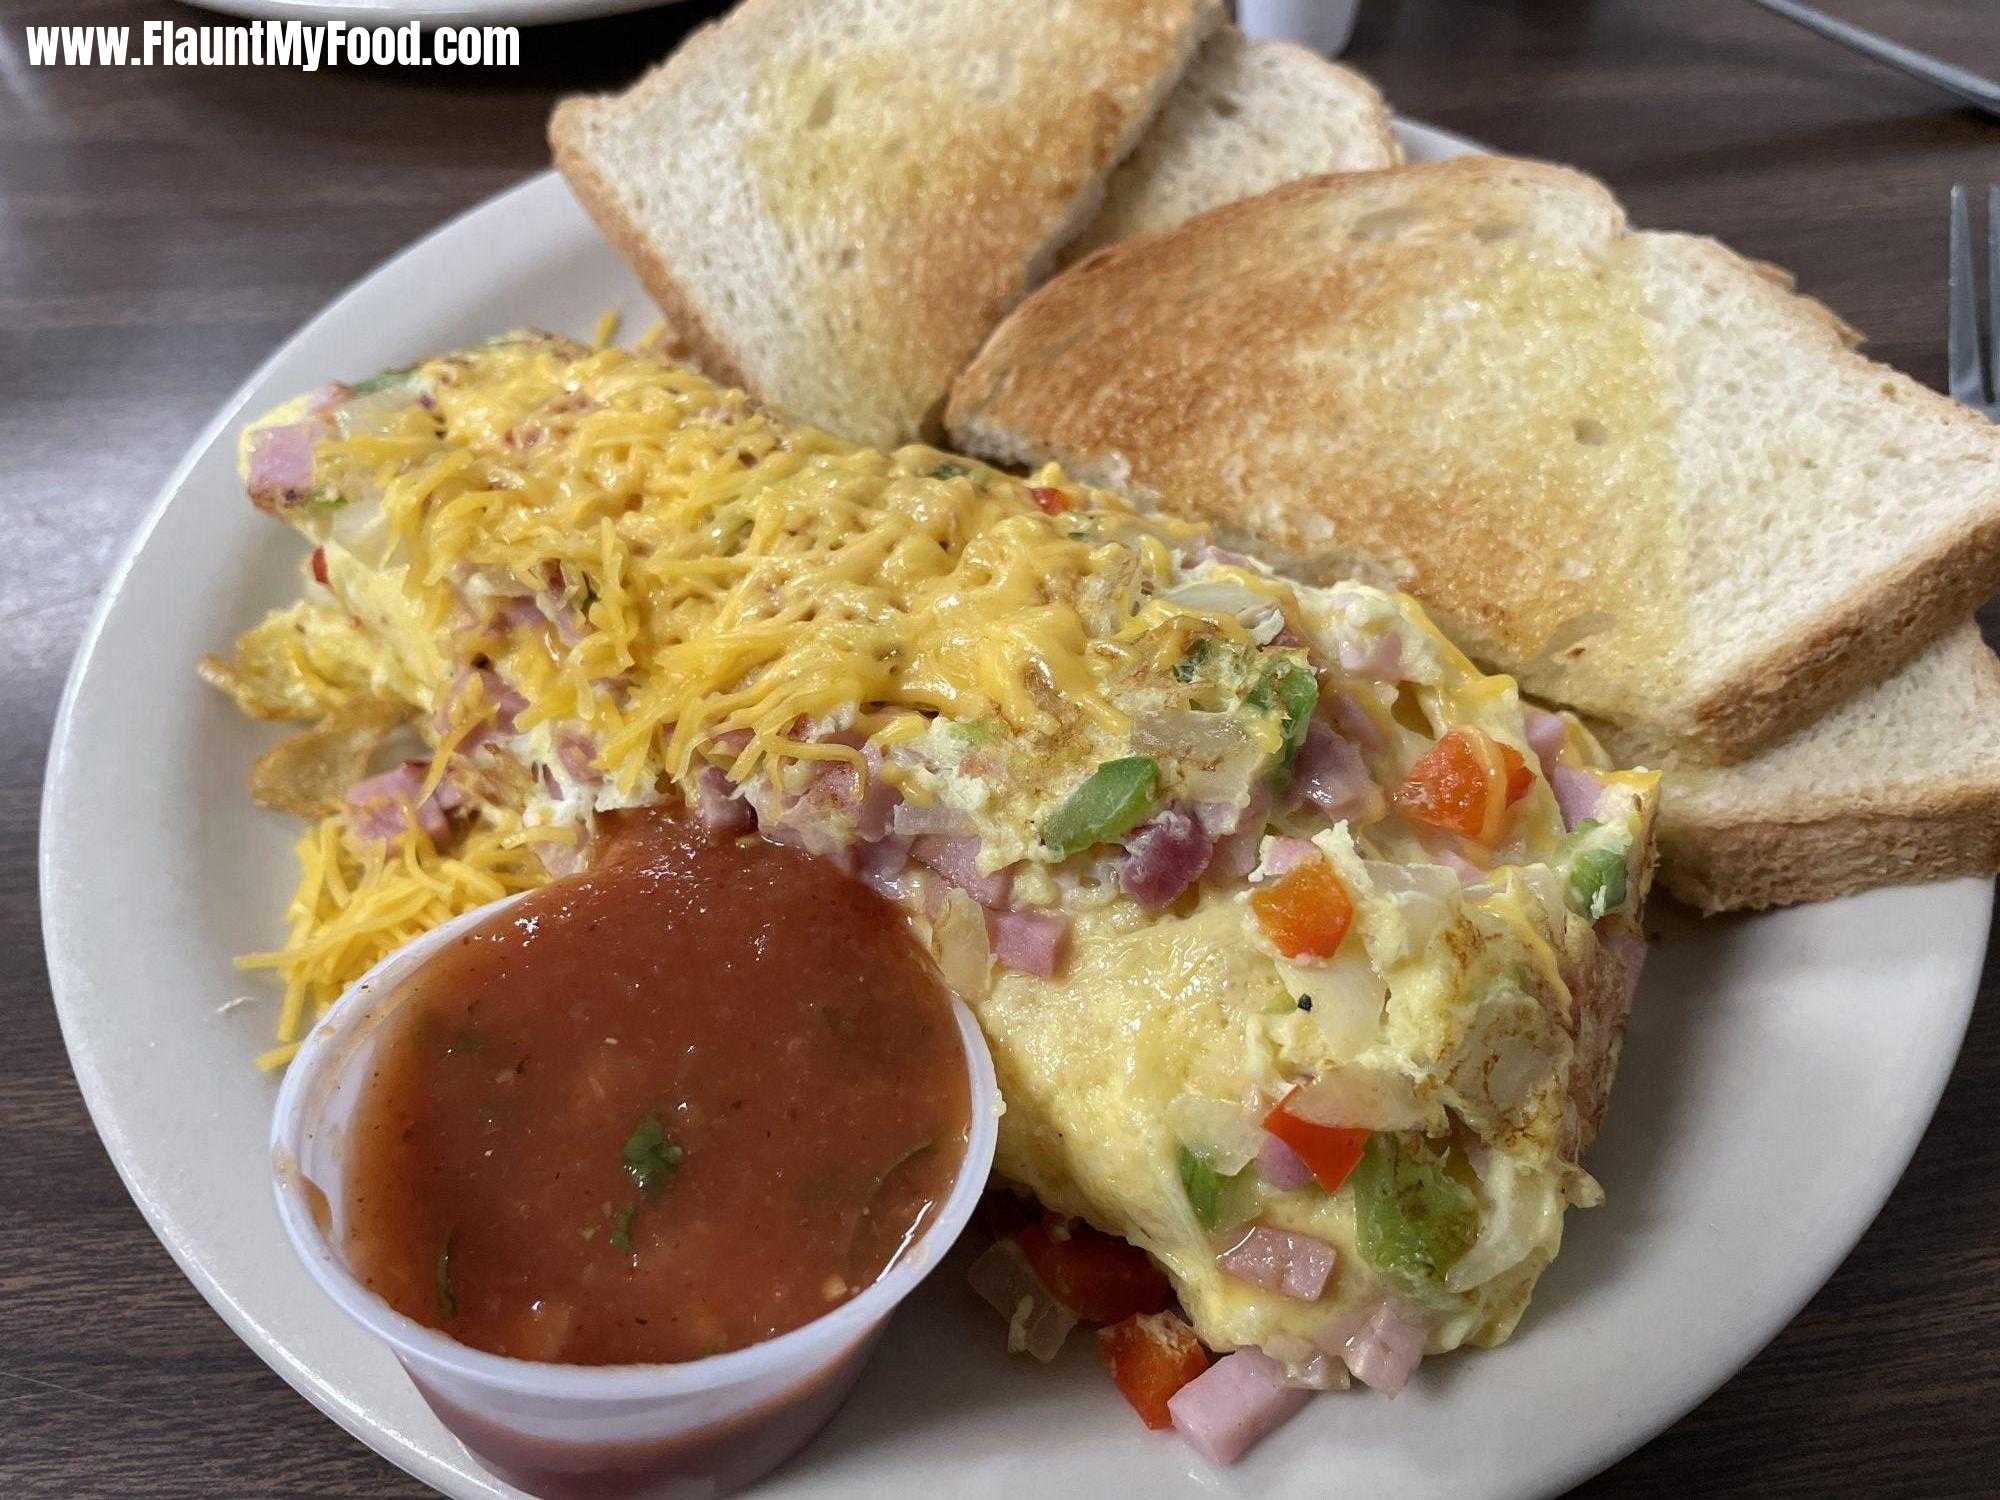 West Side Cafe on Camp BowieWestern omelette! Home cooked meals, friendly old fashioned service